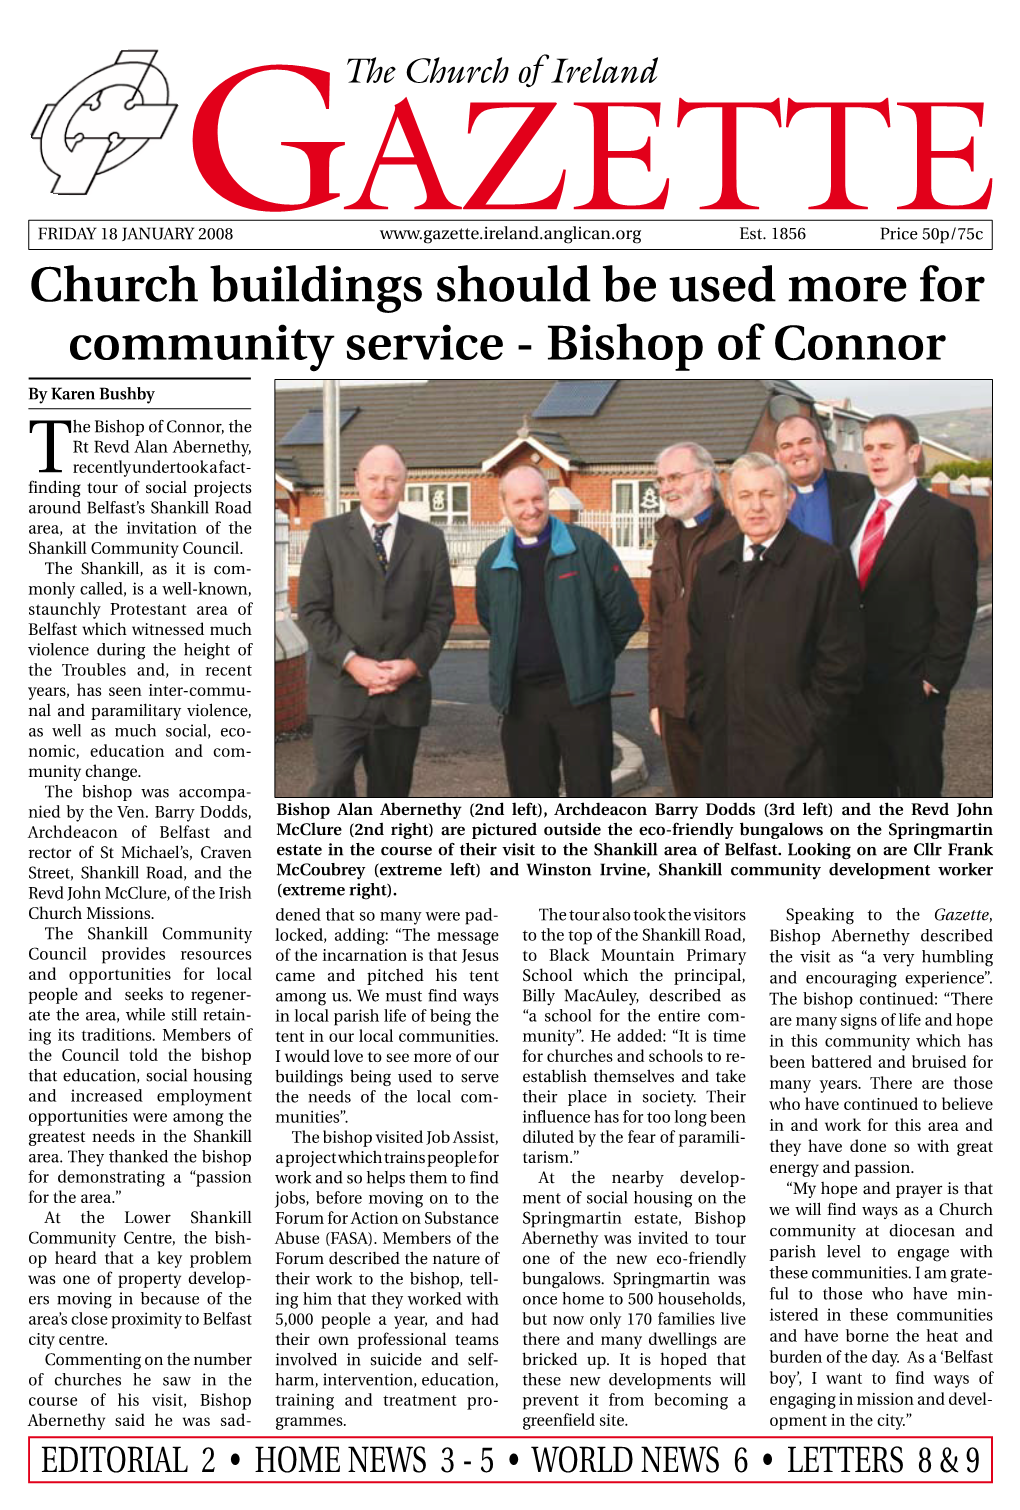 Church Buildings Should Be Used More for Community Service